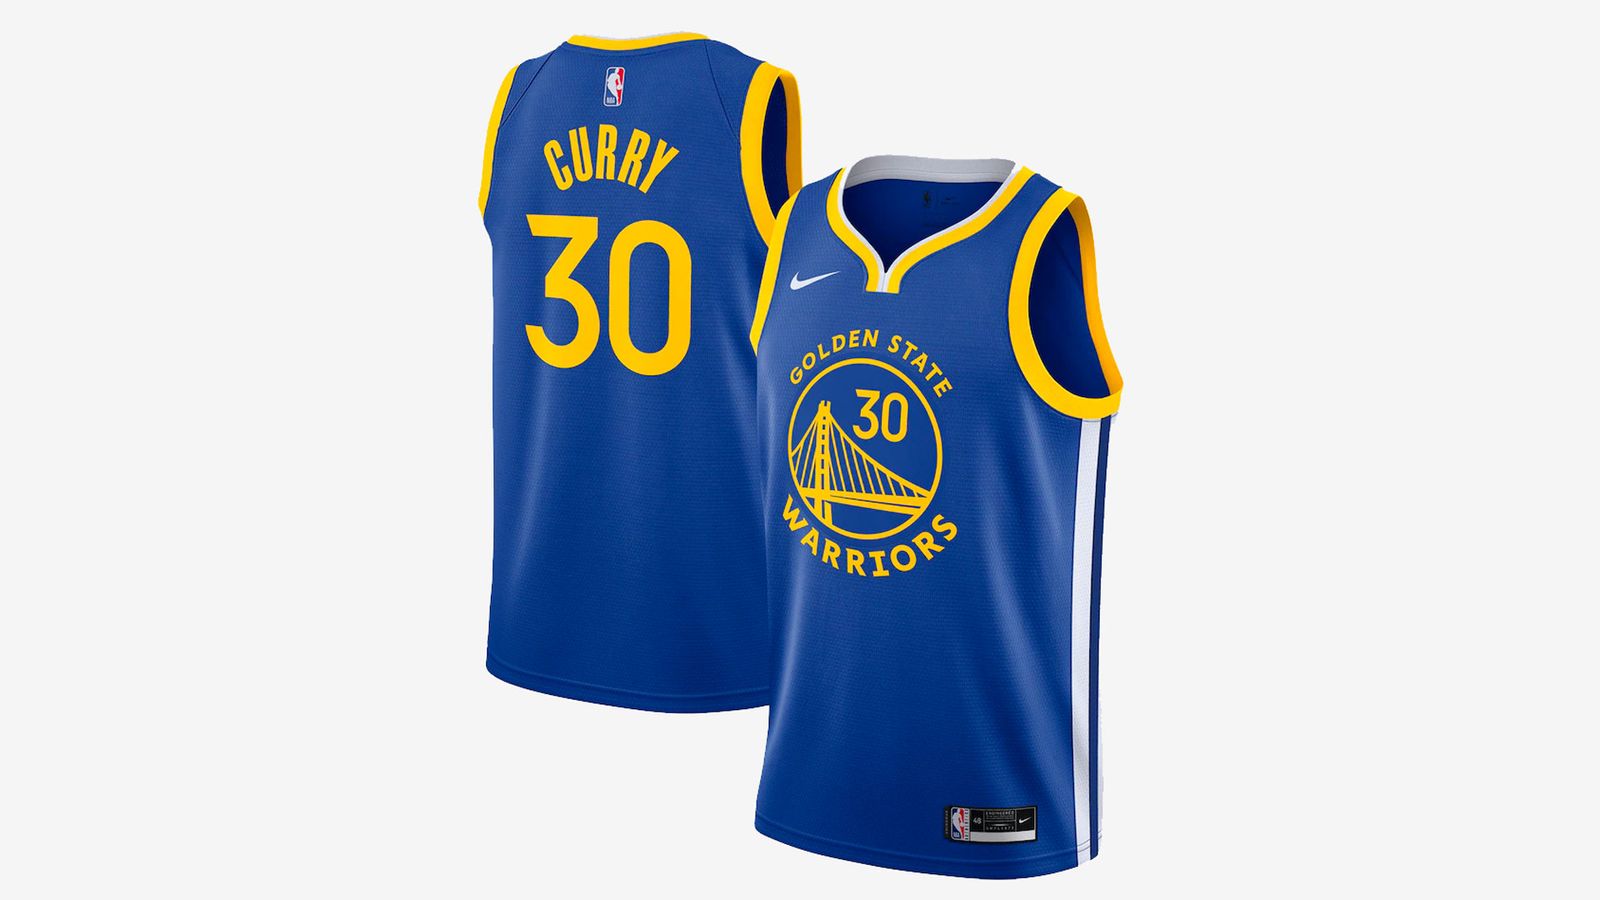 Stephen Curry Golden State Warriors 2020/21 Swingman Jersey product image of a blue and golden yellow sleeveless uniform with white details.